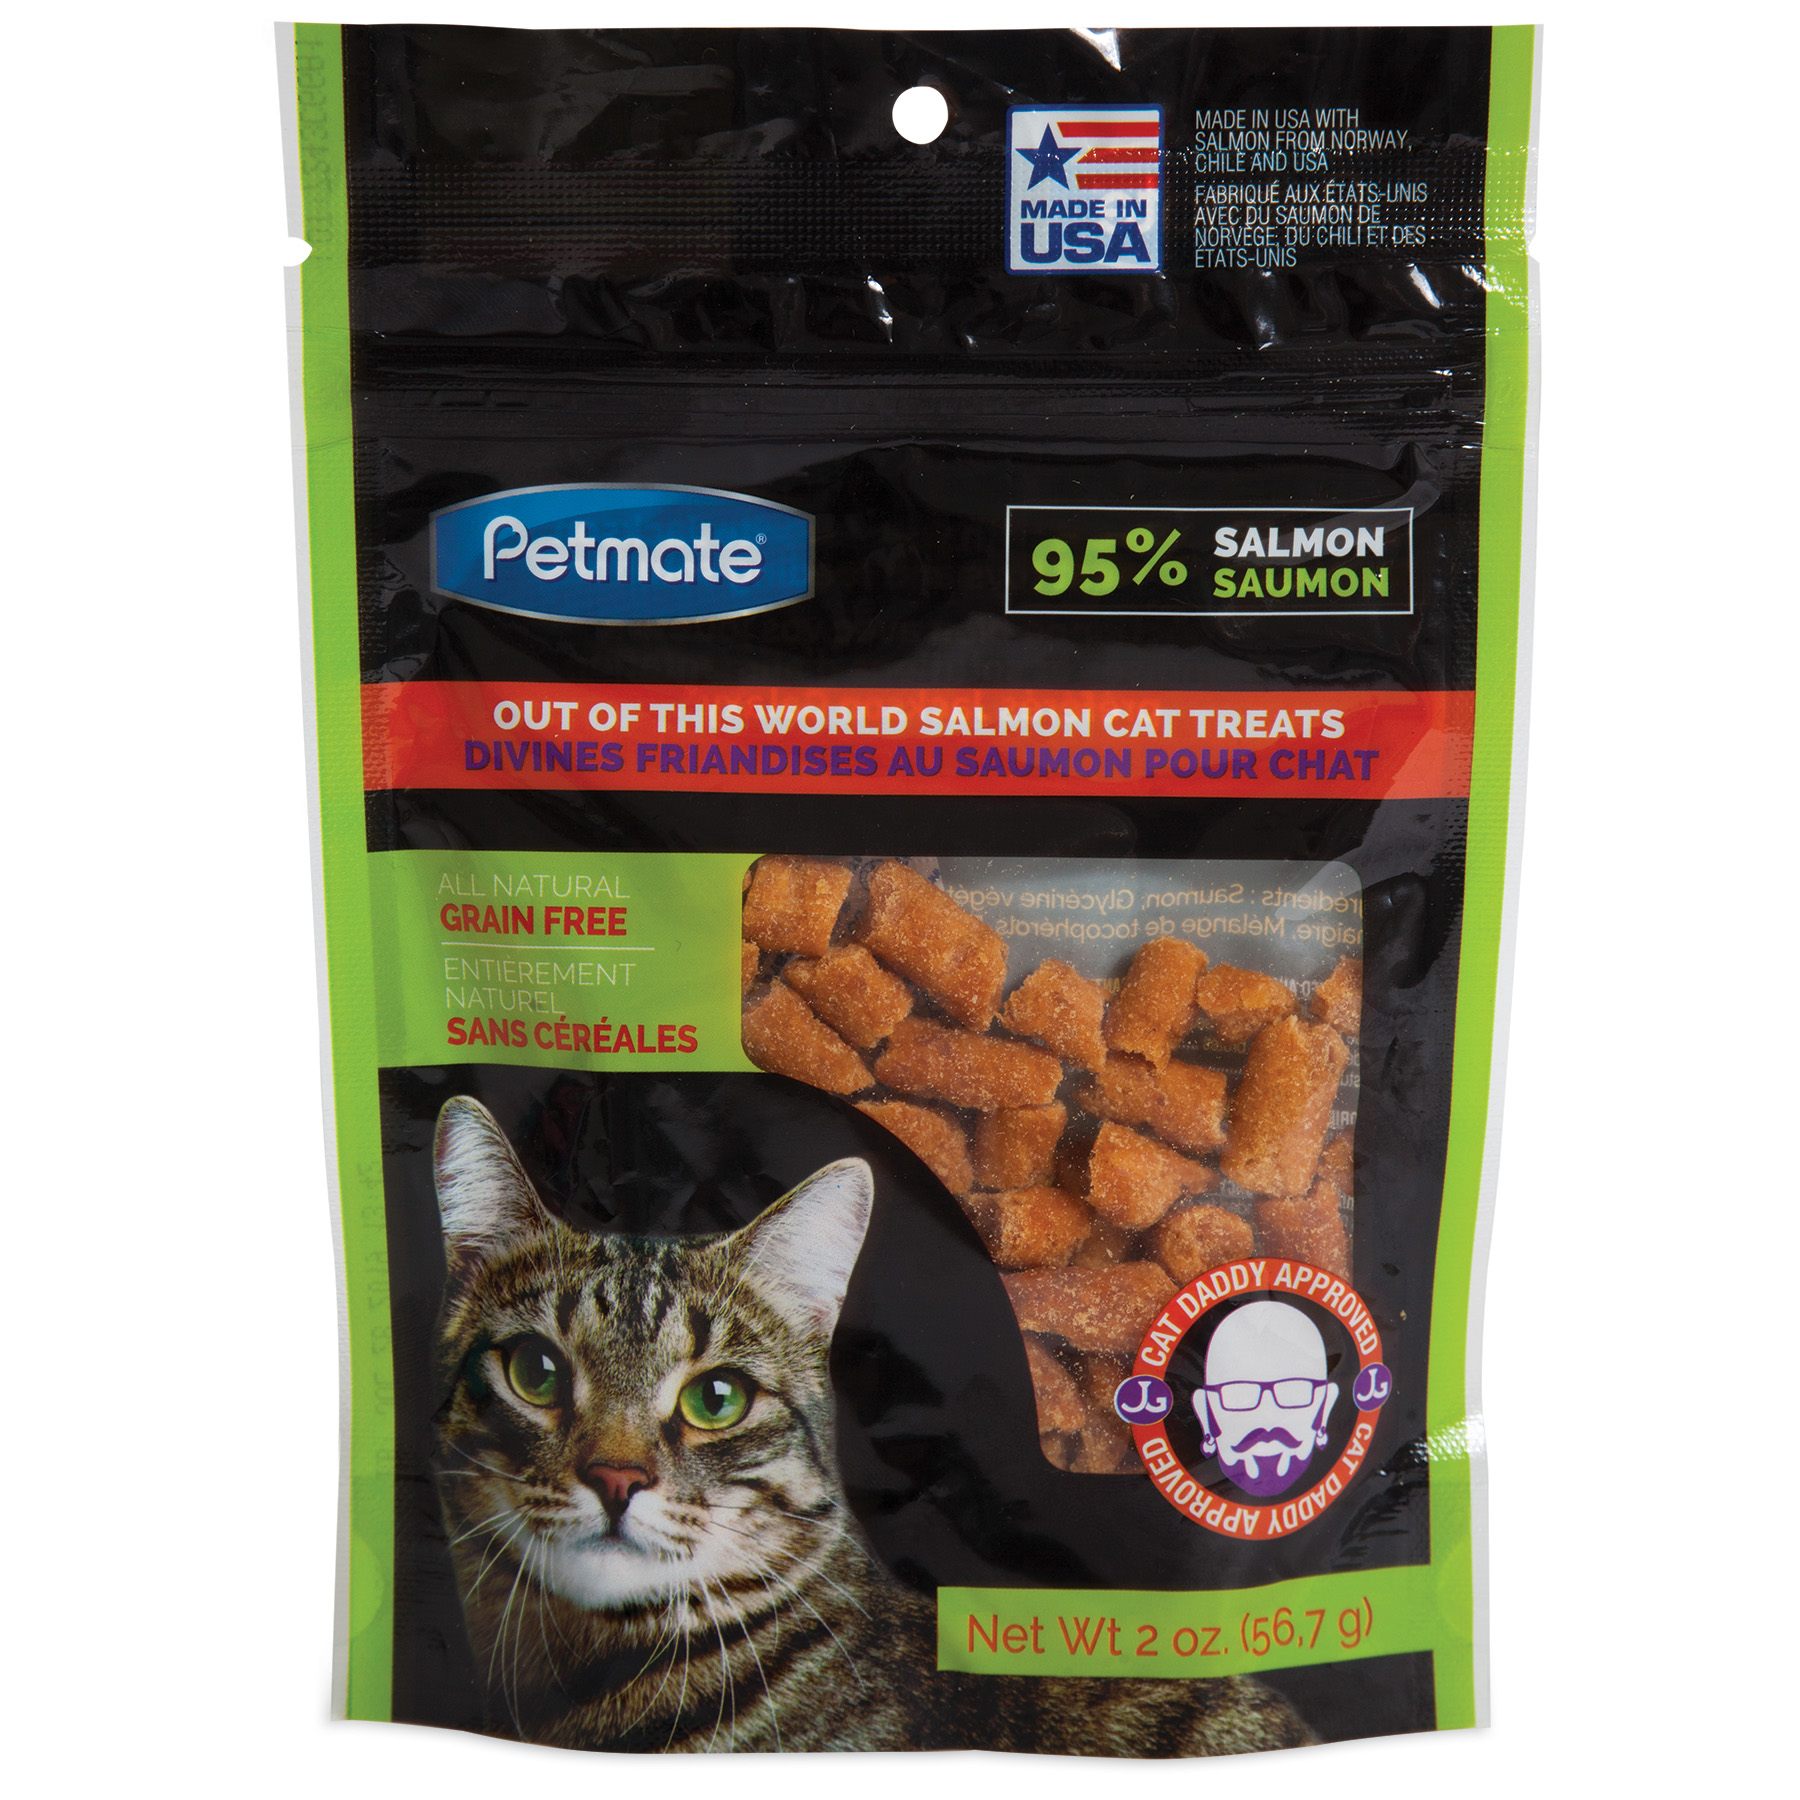 Petmate Out of this World Salmon Cat Treats